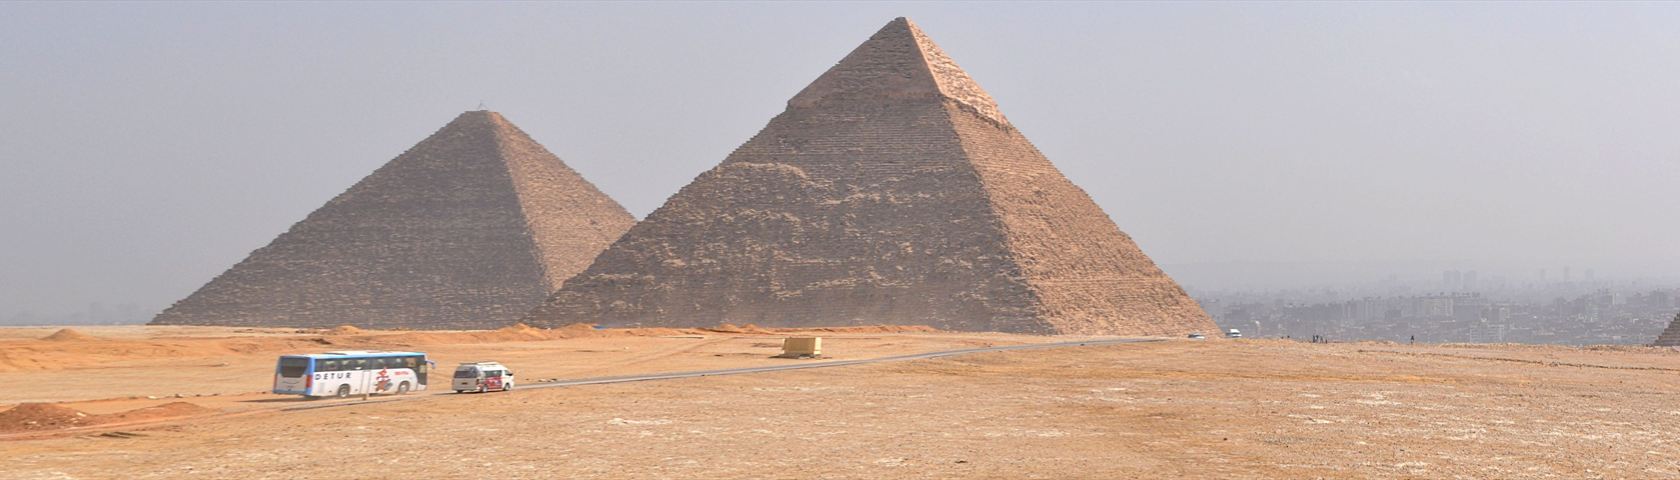 The Great Pyramids